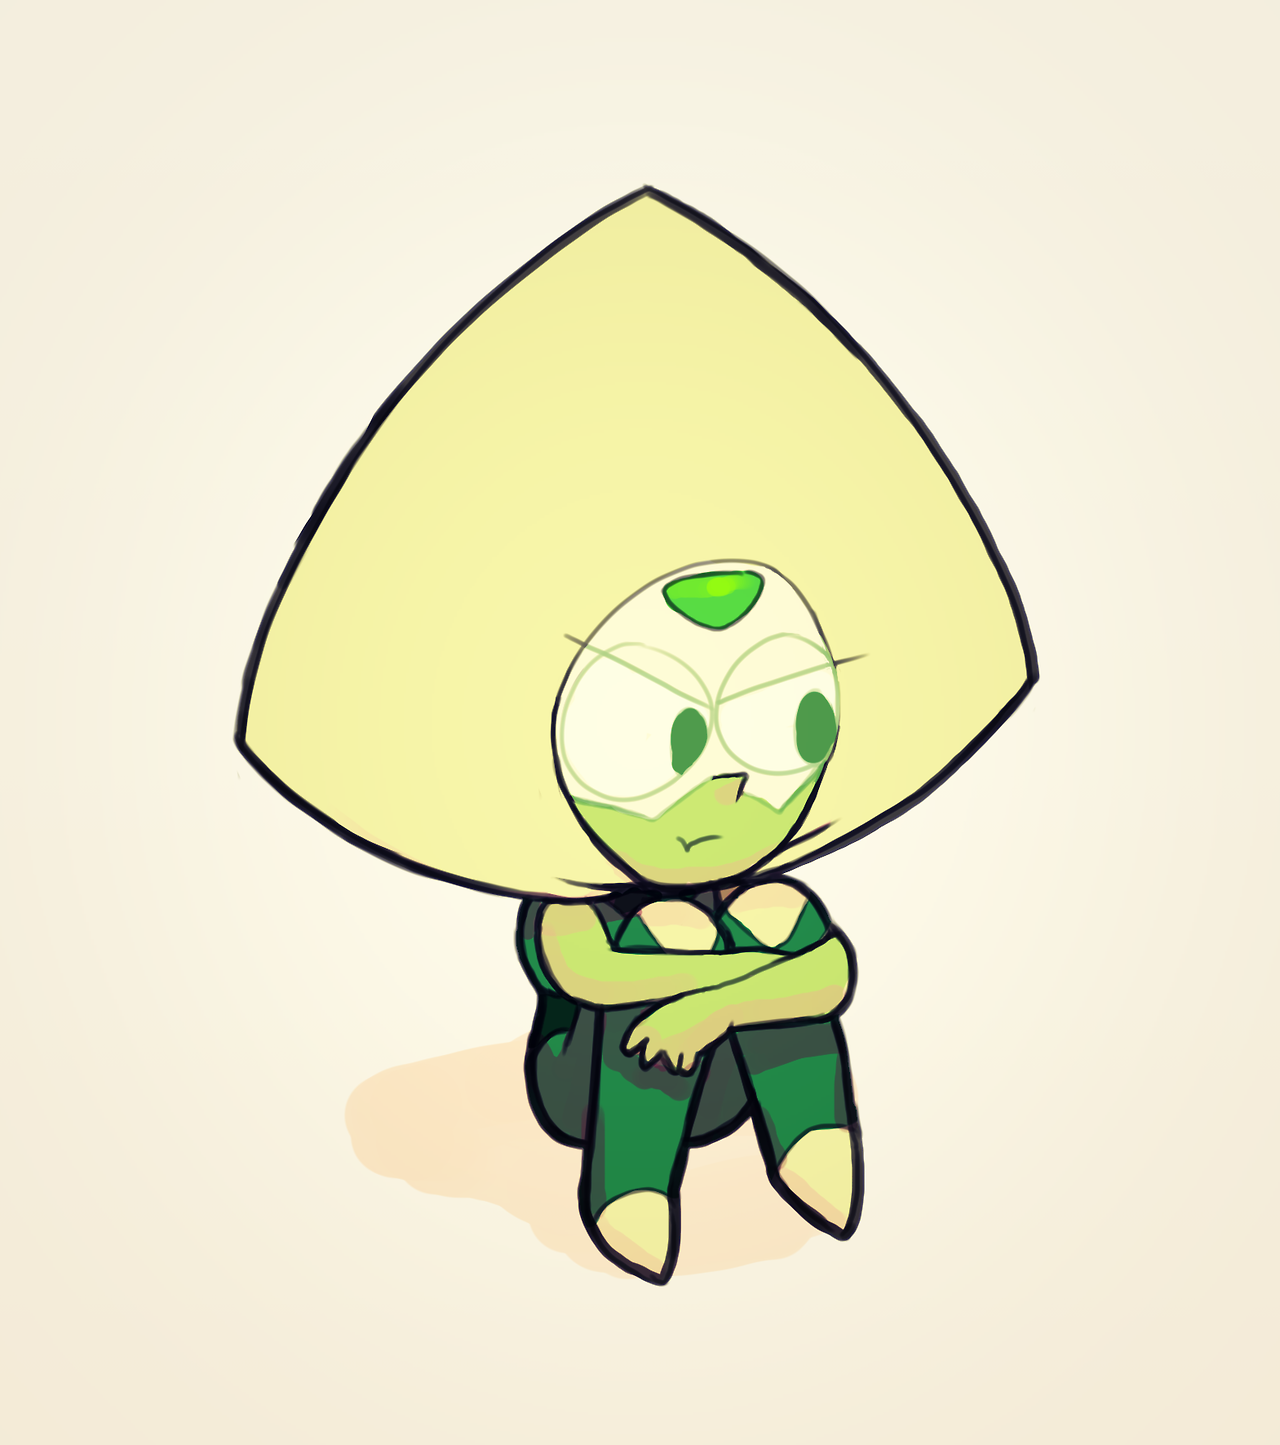 Lol I tried to draw Peridot as small as I could while keeping her cute.